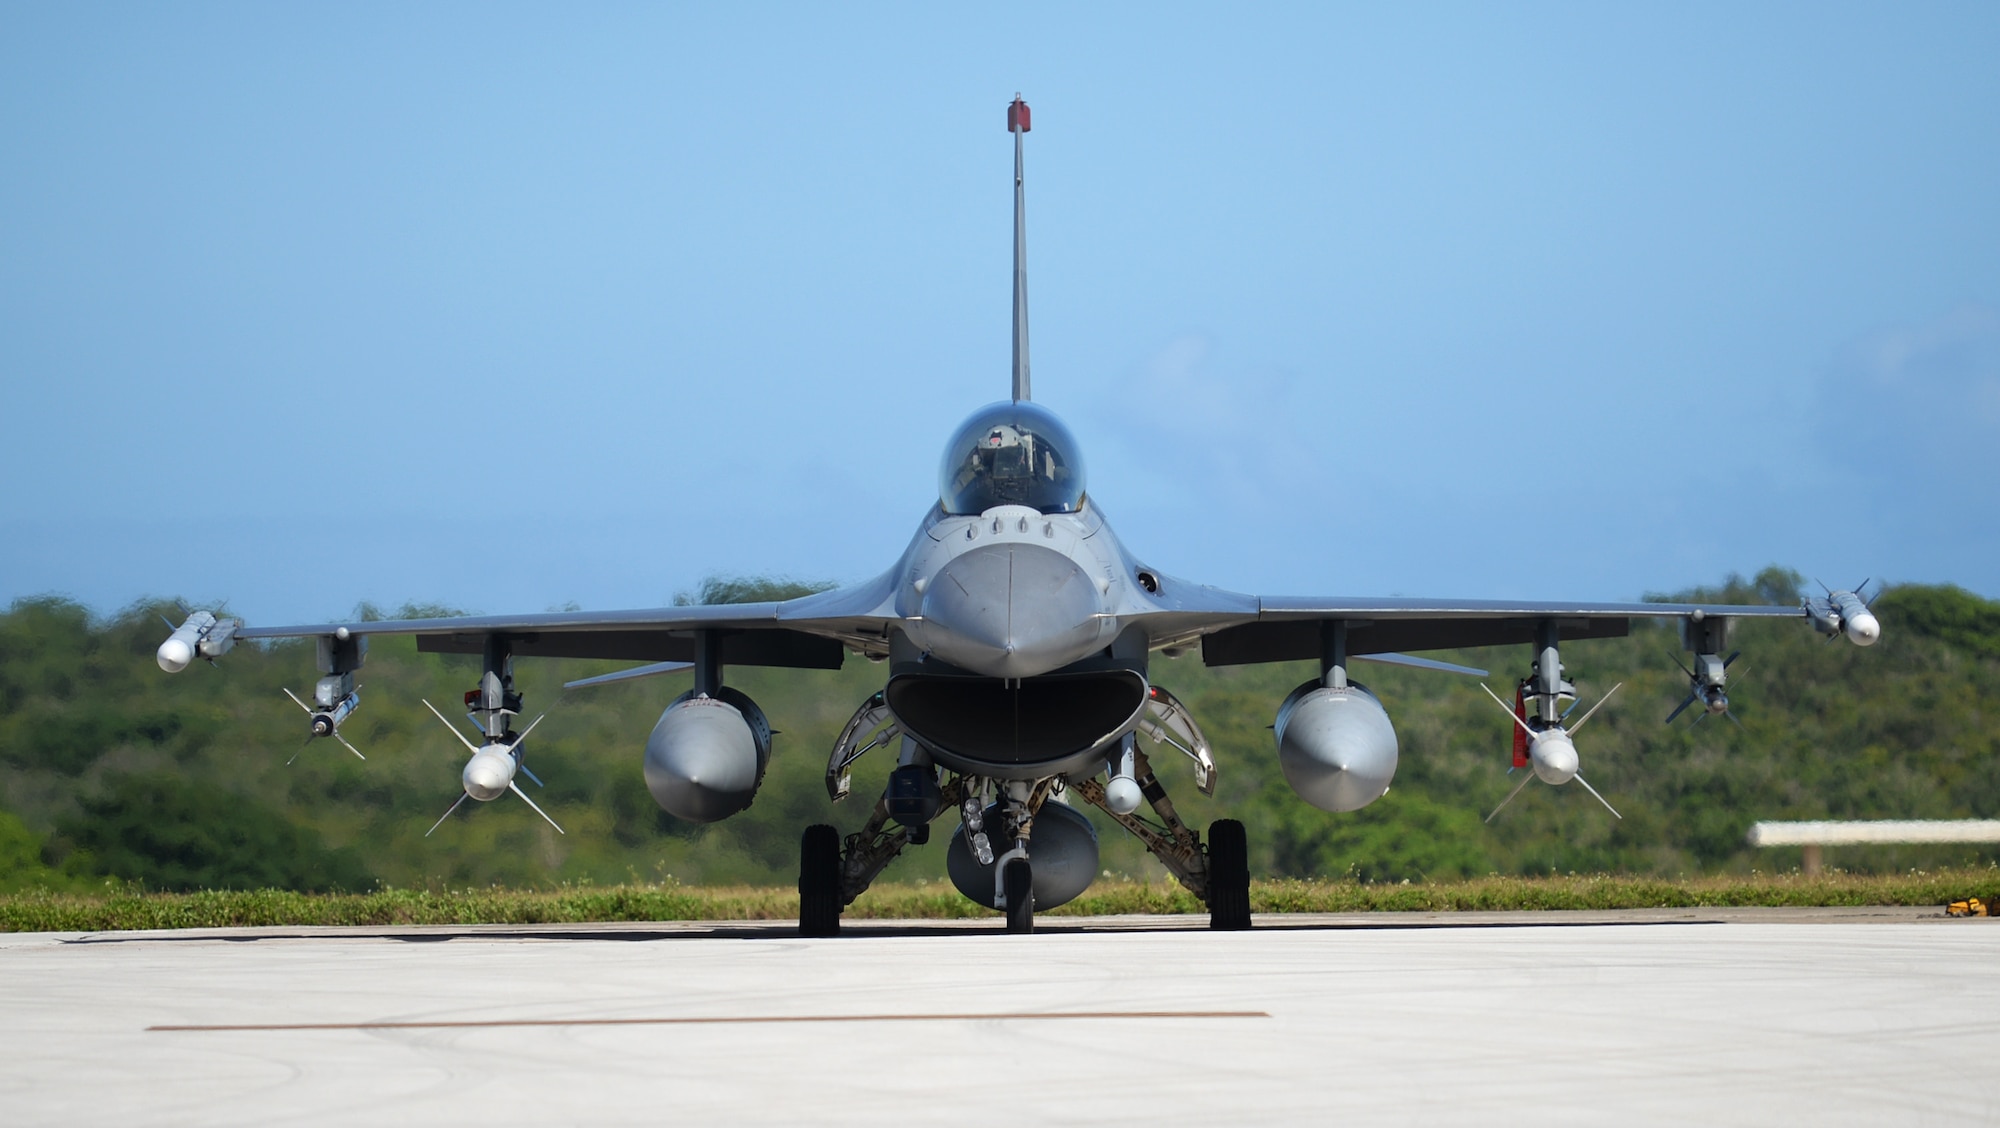 An F-16 Fighting Falcon pilot assigned to the 13th Fighter Squadron, Misawa Air Base, Japan, performs preflight checks Feb. 4, 2016, at Andersen Air Force Base, Guam.  Several F-16 Fighting Falcons from the 13th FS are deployed to Andersen AFB in support of Cope North 2016. Cope North enhances U.S. relations with regional allies and partners by demonstrating the U.S. Air Force’s resolve to promote security and stability throughout the Indo-Asia-Pacific. (U.S. Air Force photo/Senior Airman Joshua Smoot)